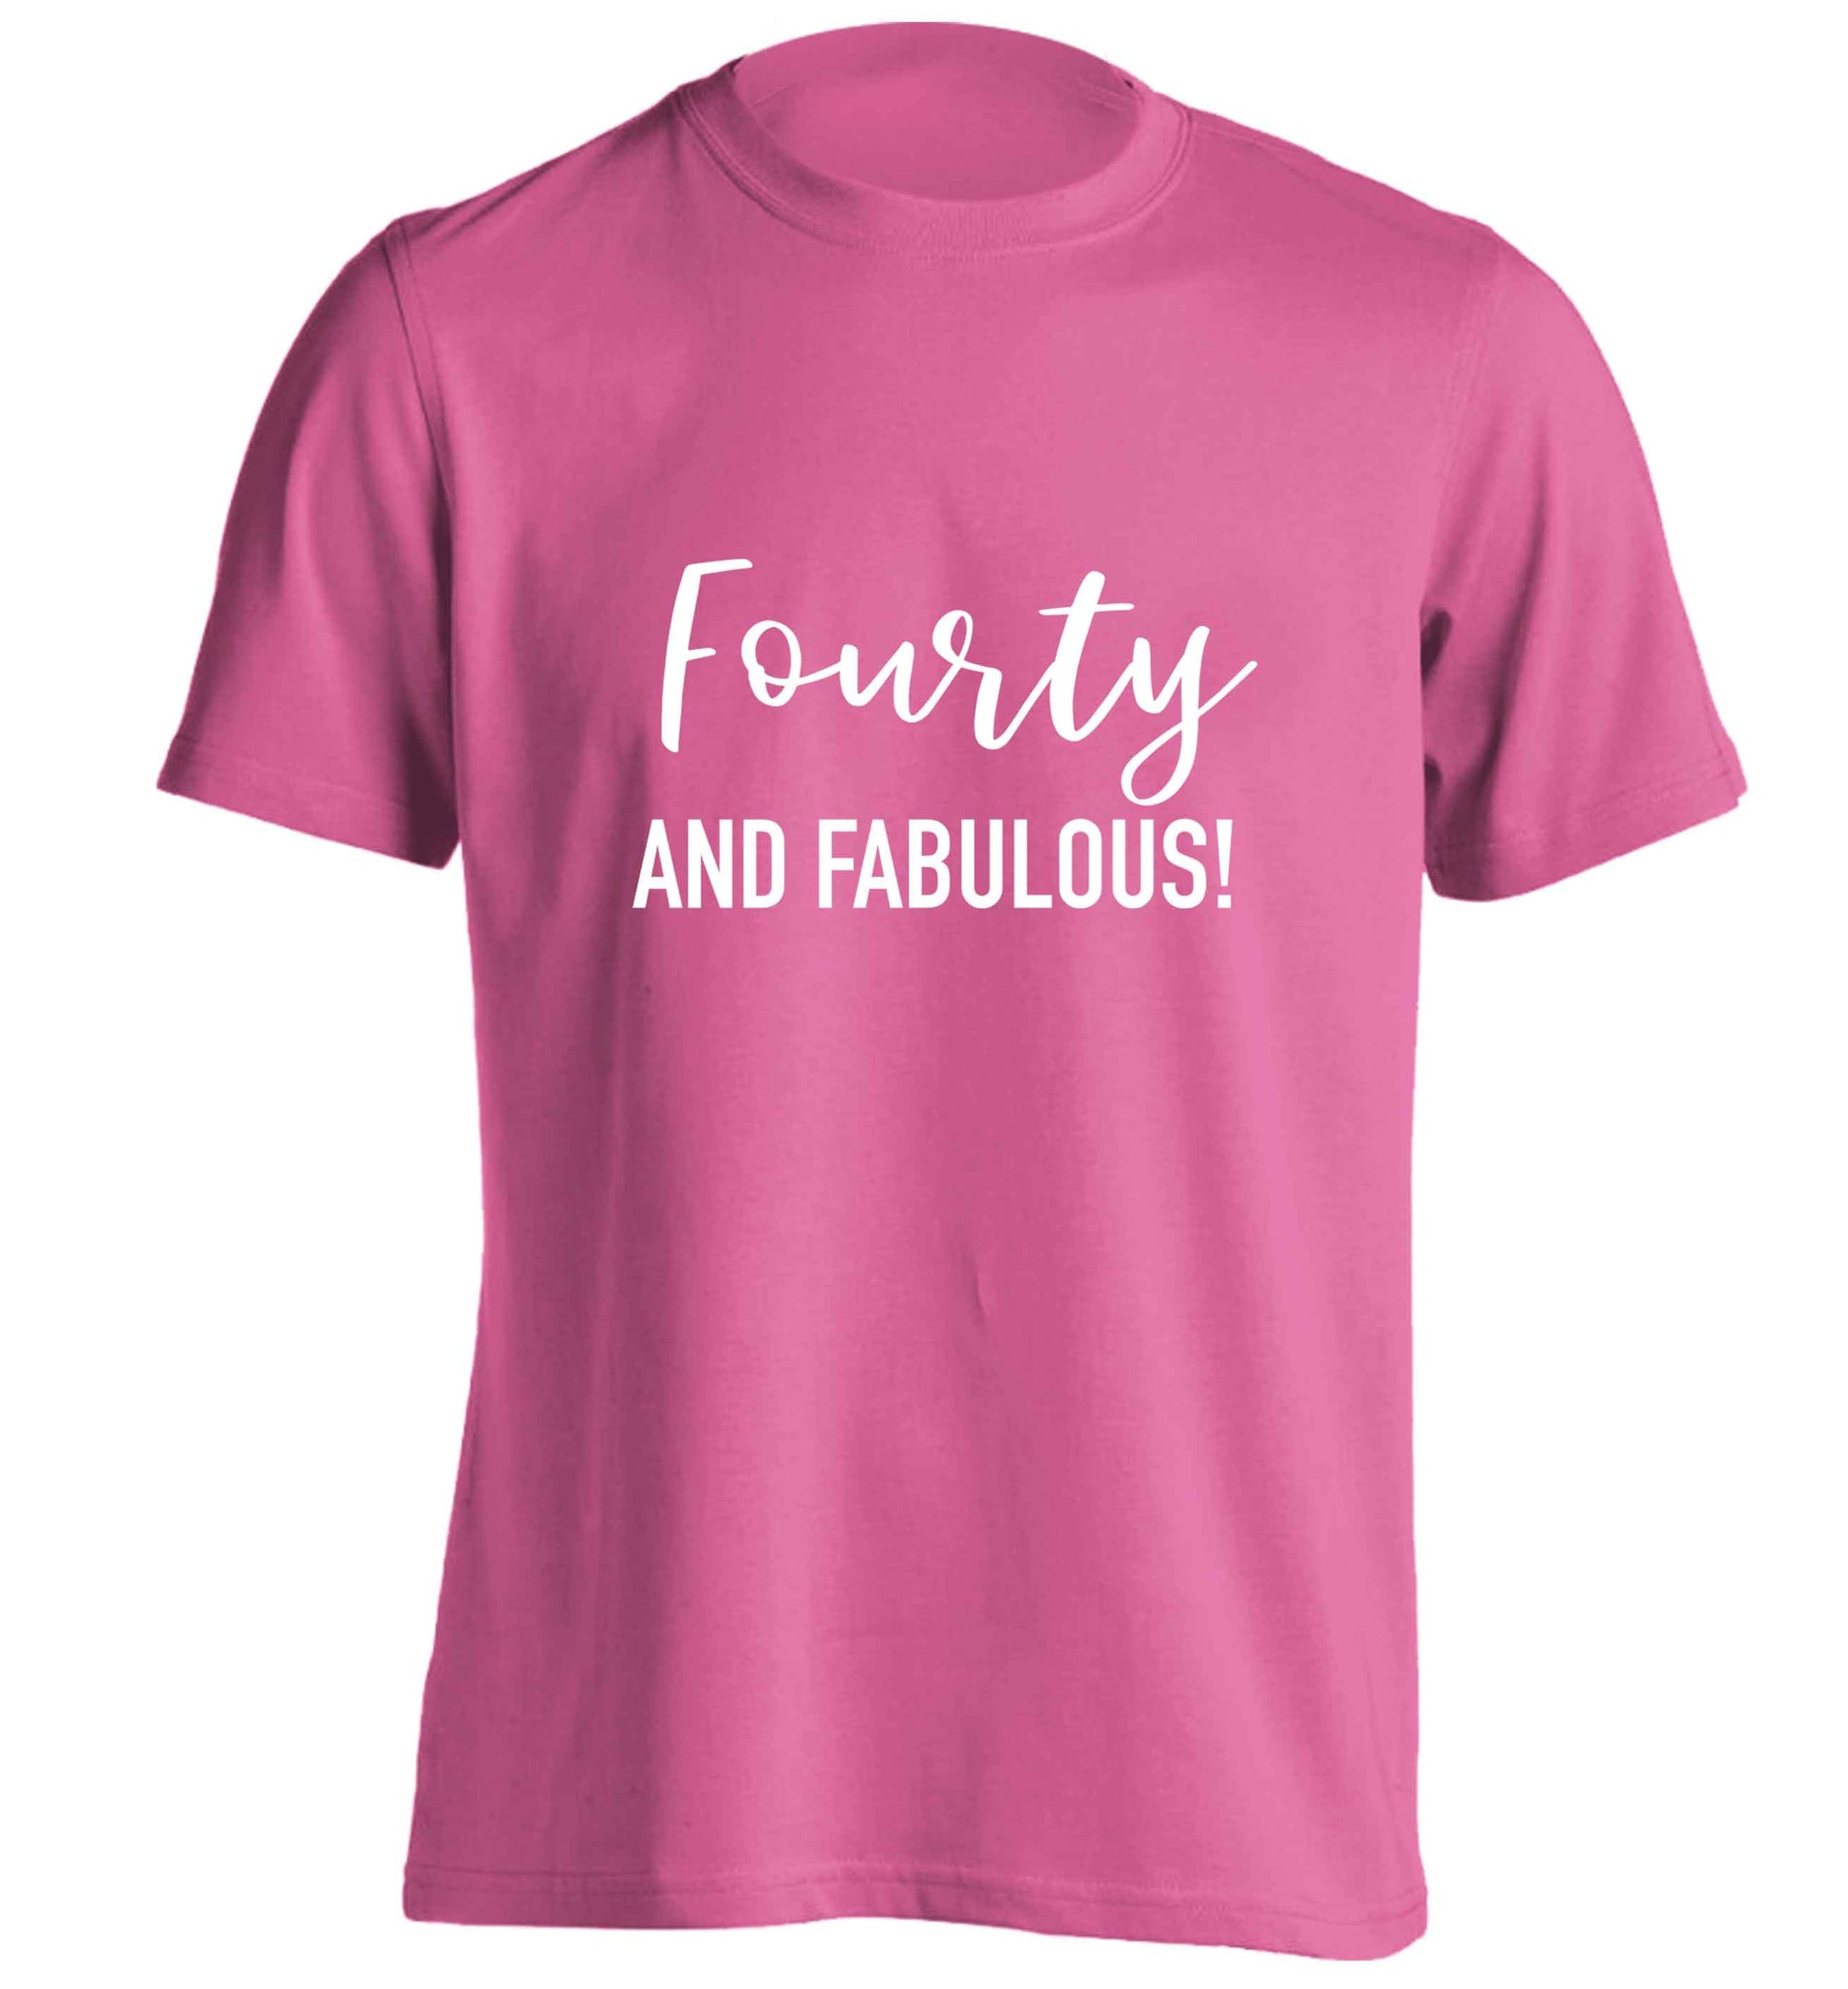 Fourty and fabulous adults unisex pink Tshirt 2XL